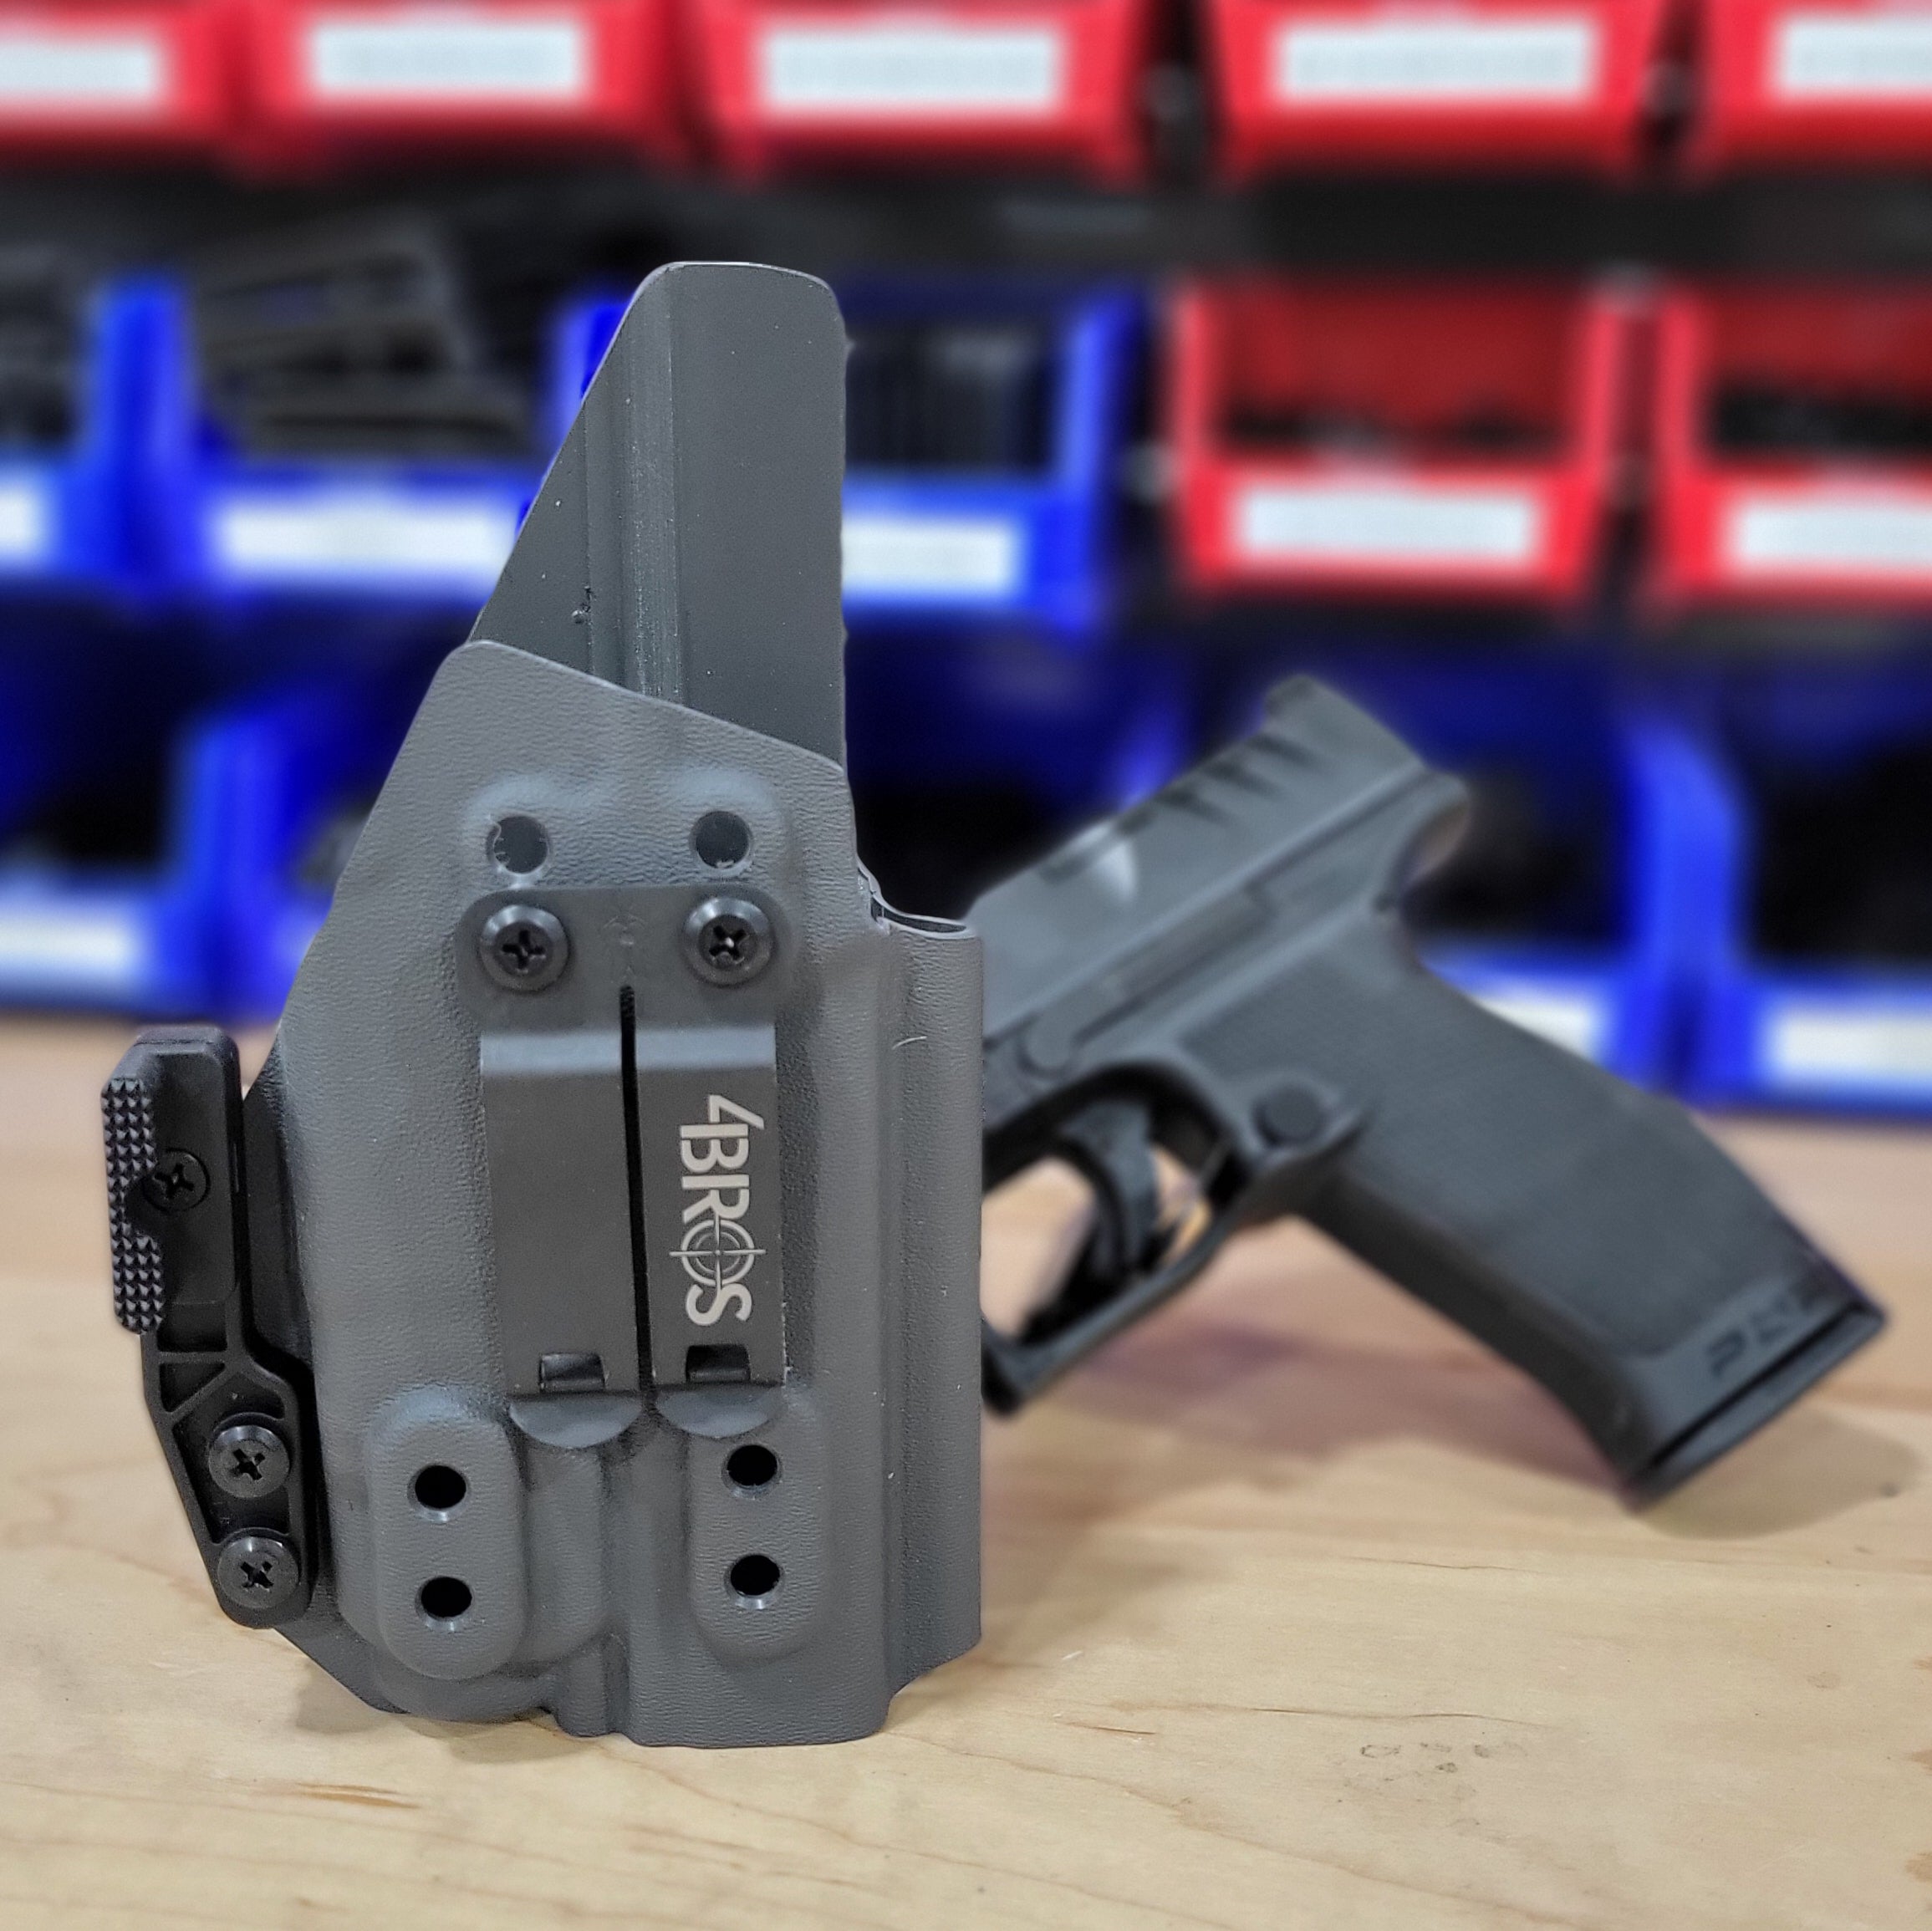 For the best concealed carry Inside Waistband IWB AIWB Holster designed to fit the Walther PDP 4" Full-Size & Compact pistol with Streamlight TLR-7A or TLR-7 on the firearm, shop Four Brothers Holsters. Cut for red dot sight, full sweat guard, adjustable retention & open muzzle for threaded barrels & compensators.